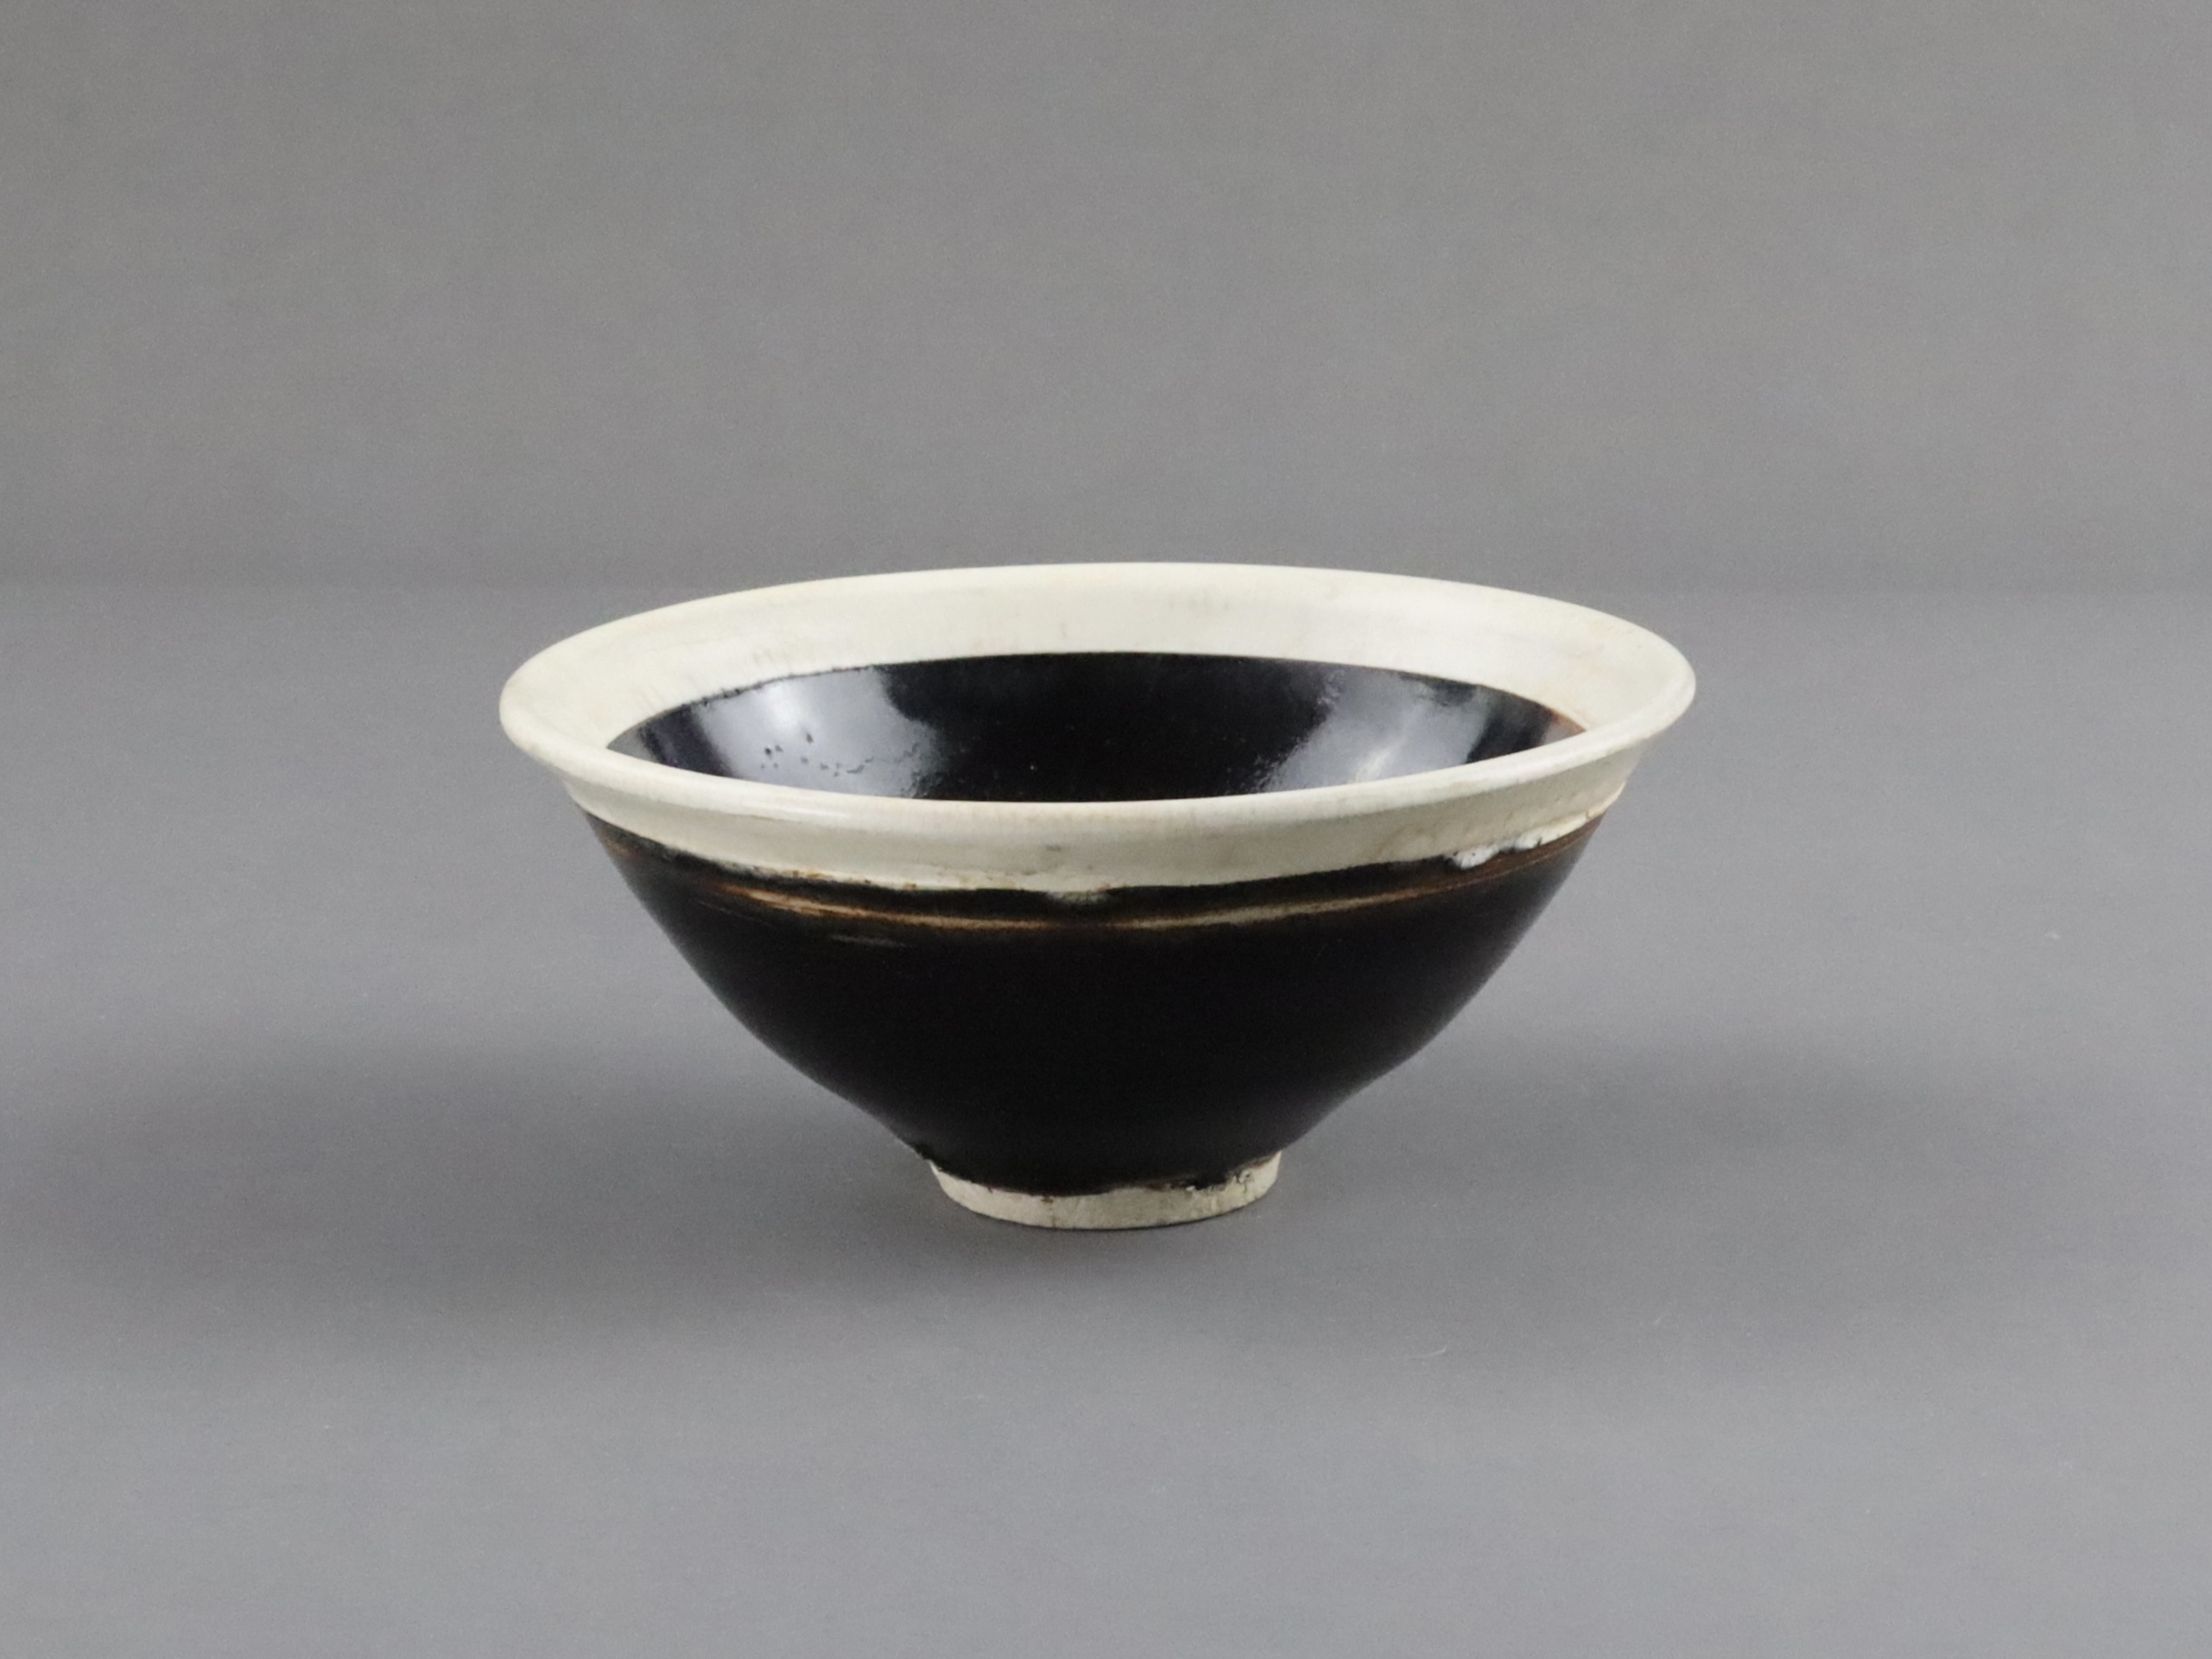 A Fine White-rimmed Black-glazed conical Bowl, Song dynasty - Image 5 of 7